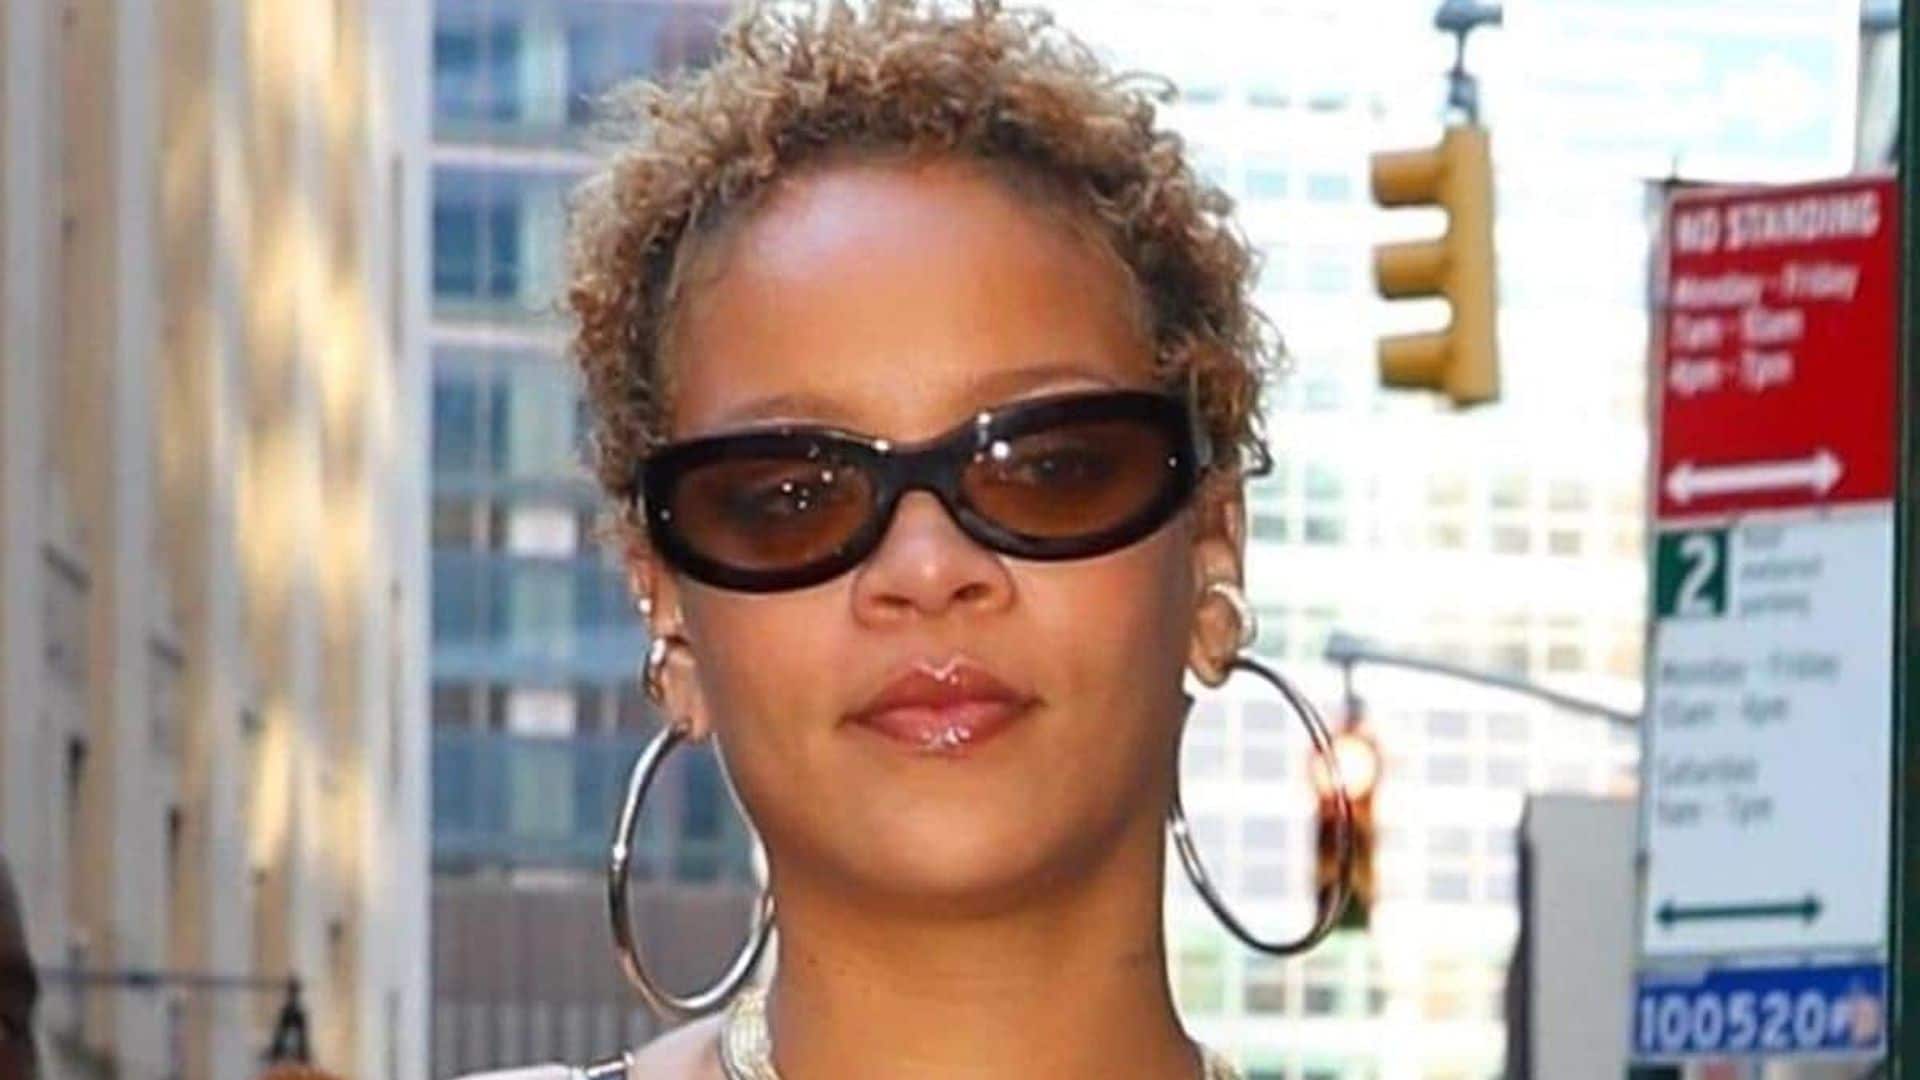 Rihanna shows off her short natural curls ahead of the Fenty Hair launch